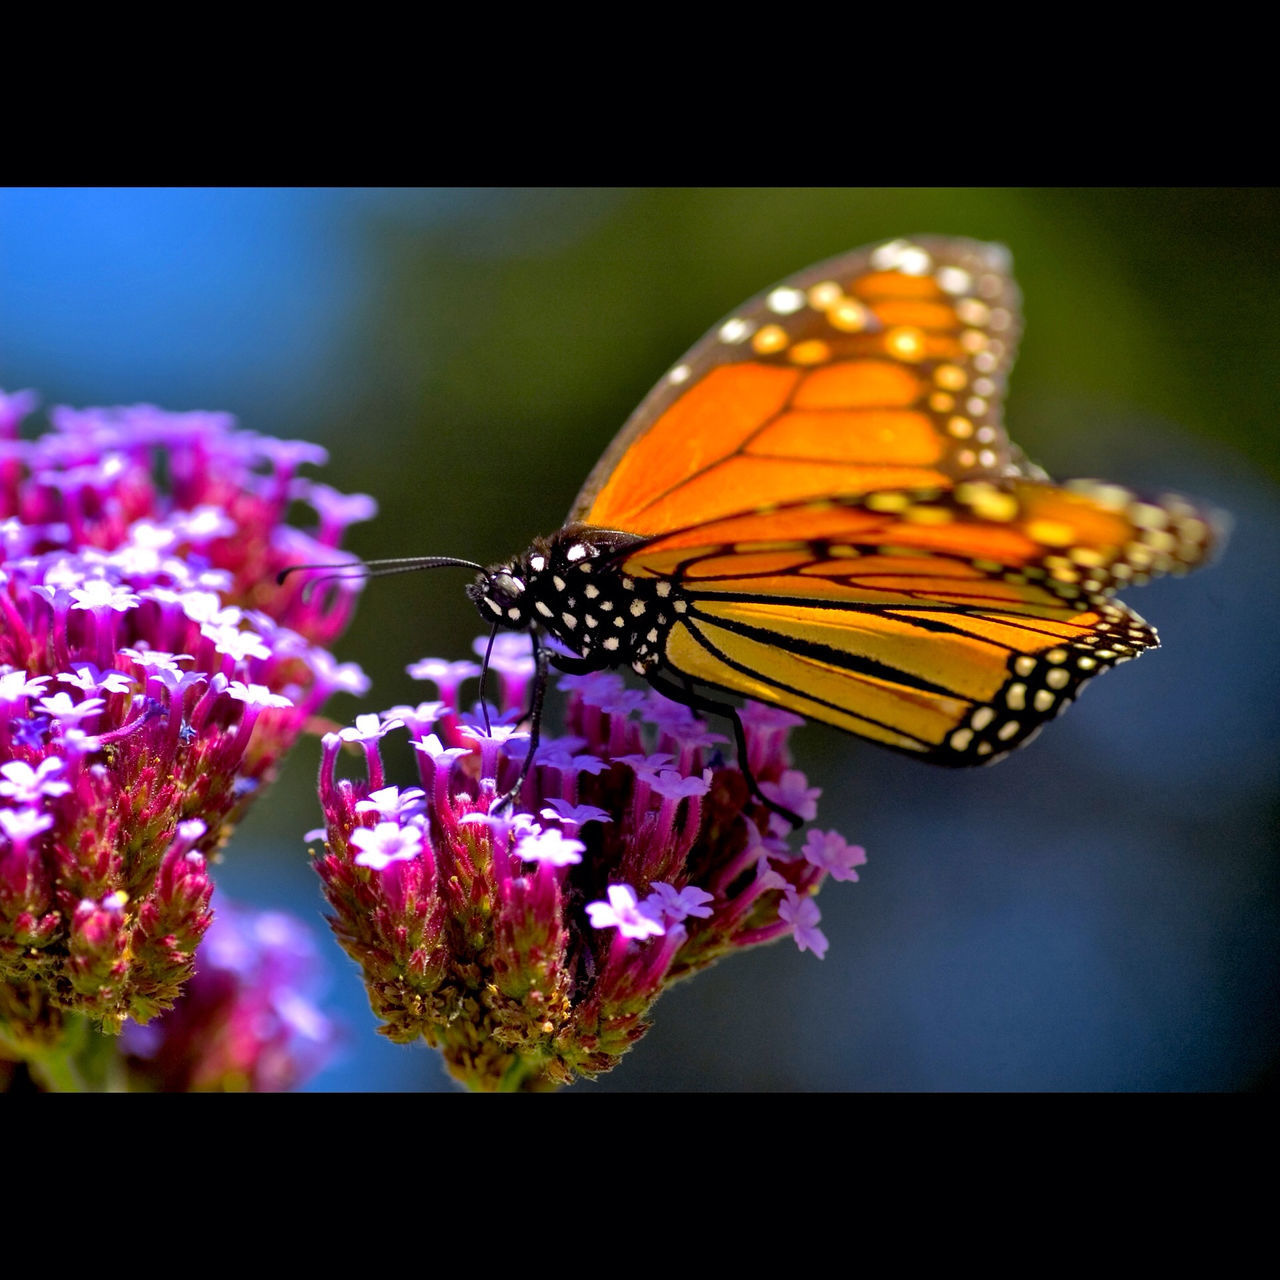 flower, insect, one animal, animal themes, animals in the wild, wildlife, butterfly - insect, butterfly, pollination, fragility, freshness, petal, close-up, beauty in nature, transfer print, focus on foreground, pink color, plant, nature, growth